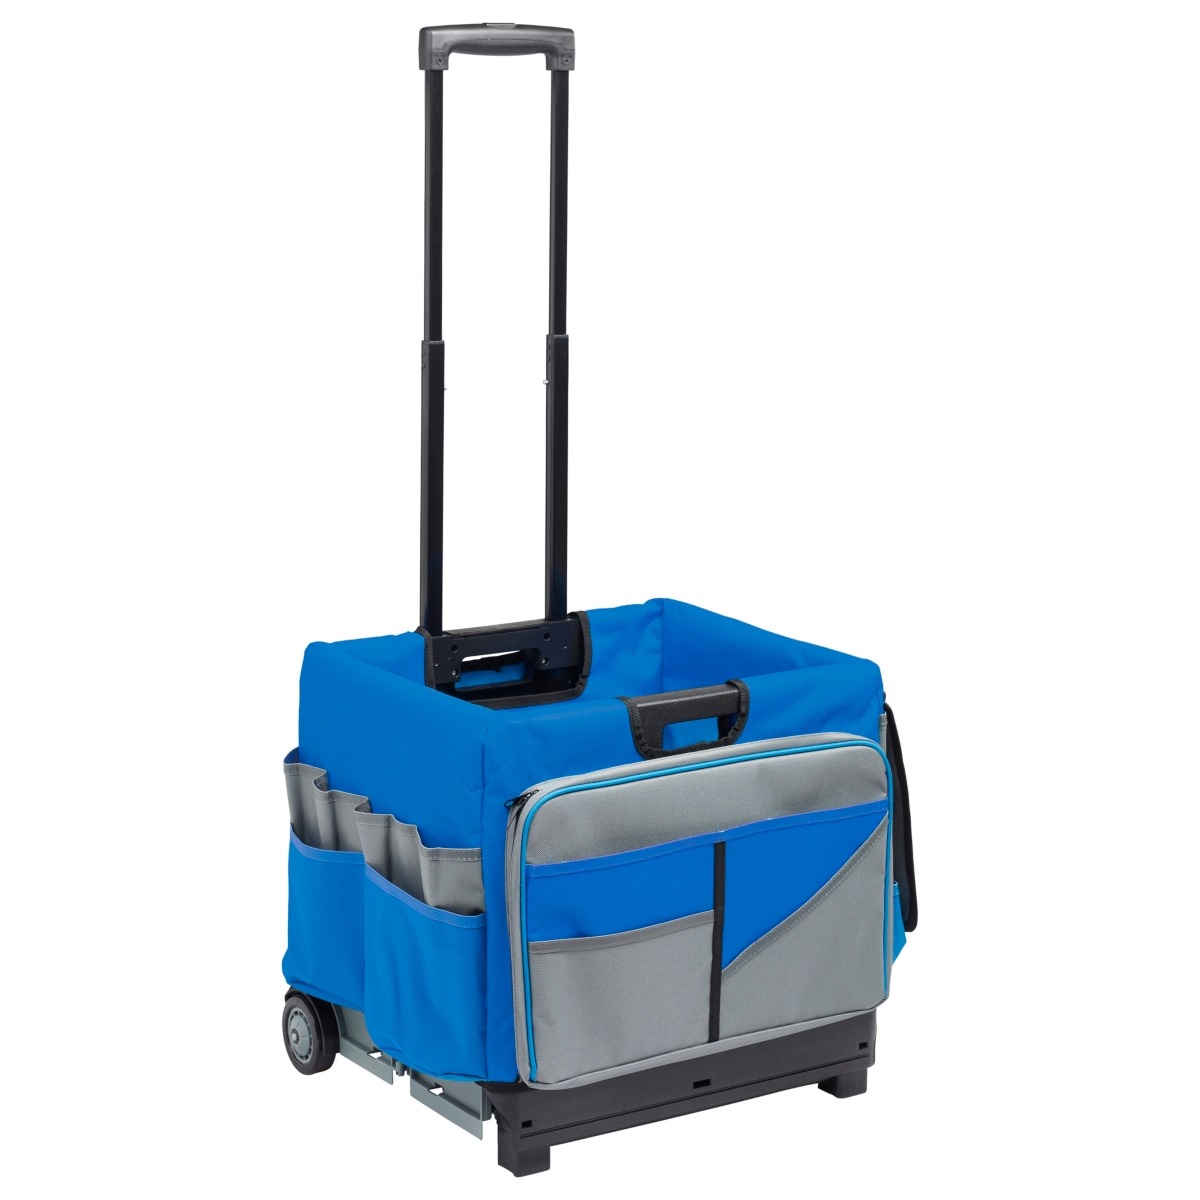 Universal Rolling Cart with Canvas Organizer Bag, Mobile Storage, Blue/Grey - Blue/grey